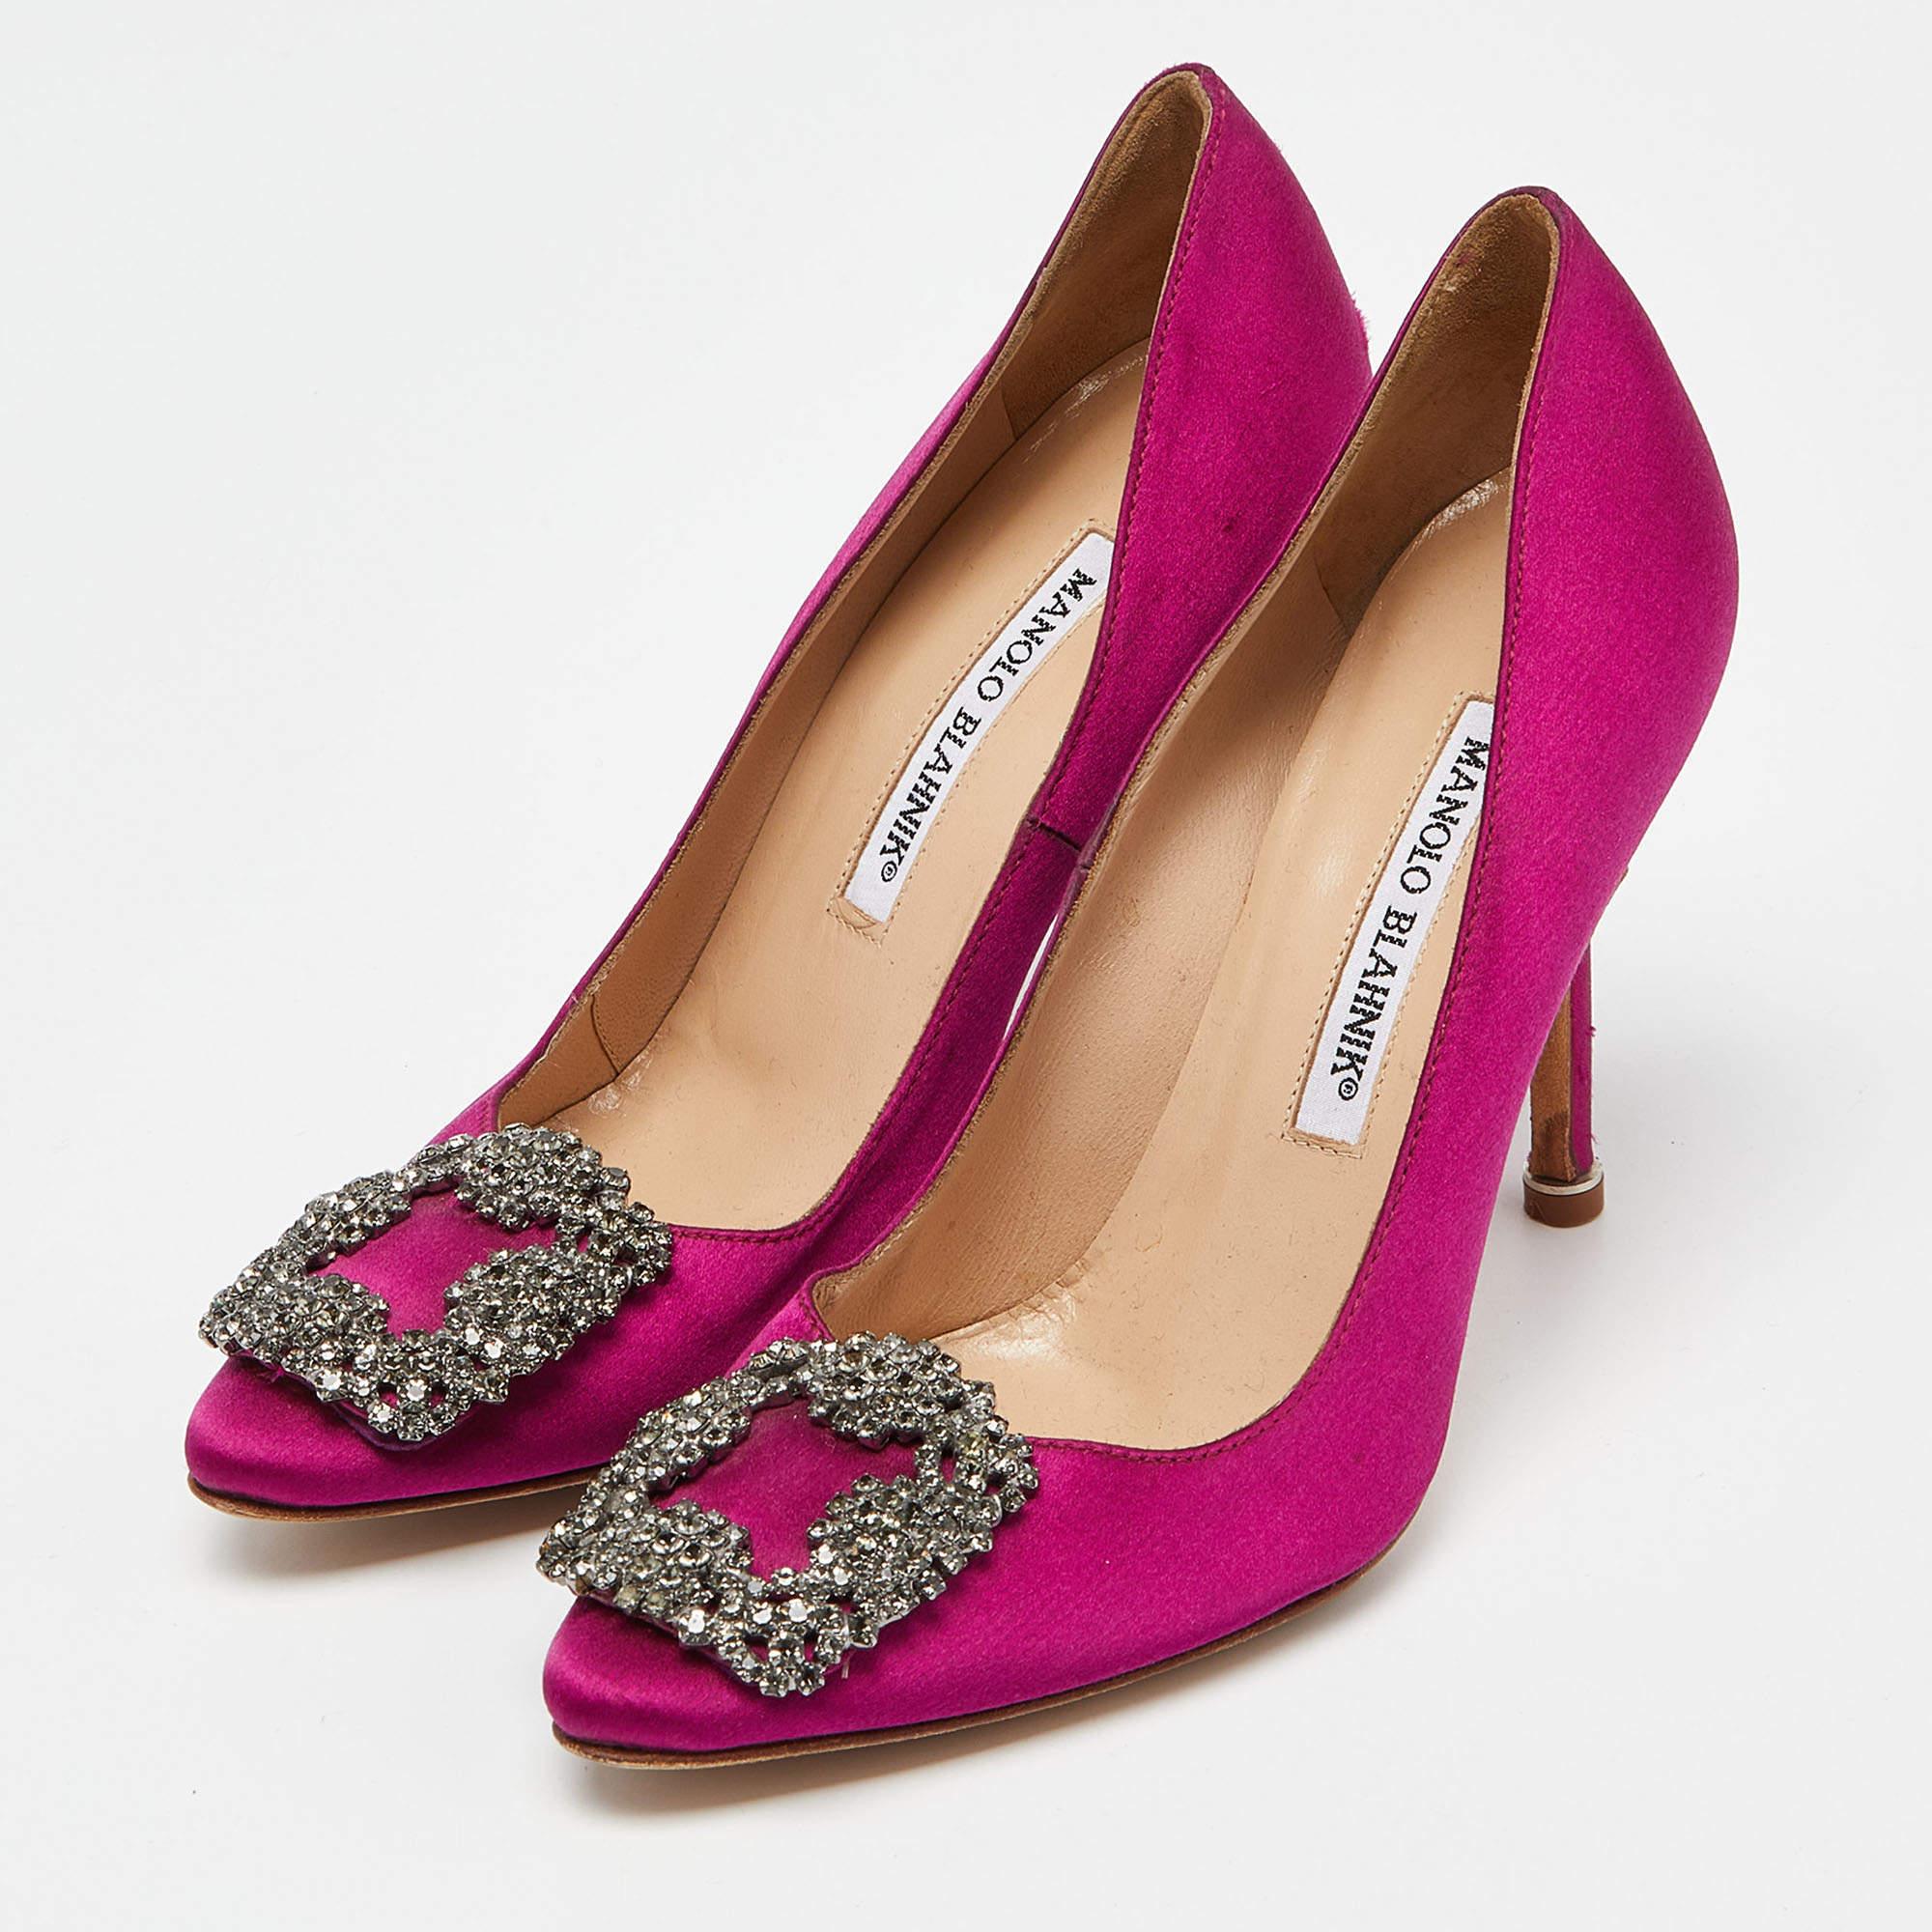 The 10.5cm heels of this pair of Manolo Blahnik pumps will reflect grace and luxury in every step. Made from satin, it is made striking with a crystal-embellished buckle detailing on the toes and exhibits branded insoles.

